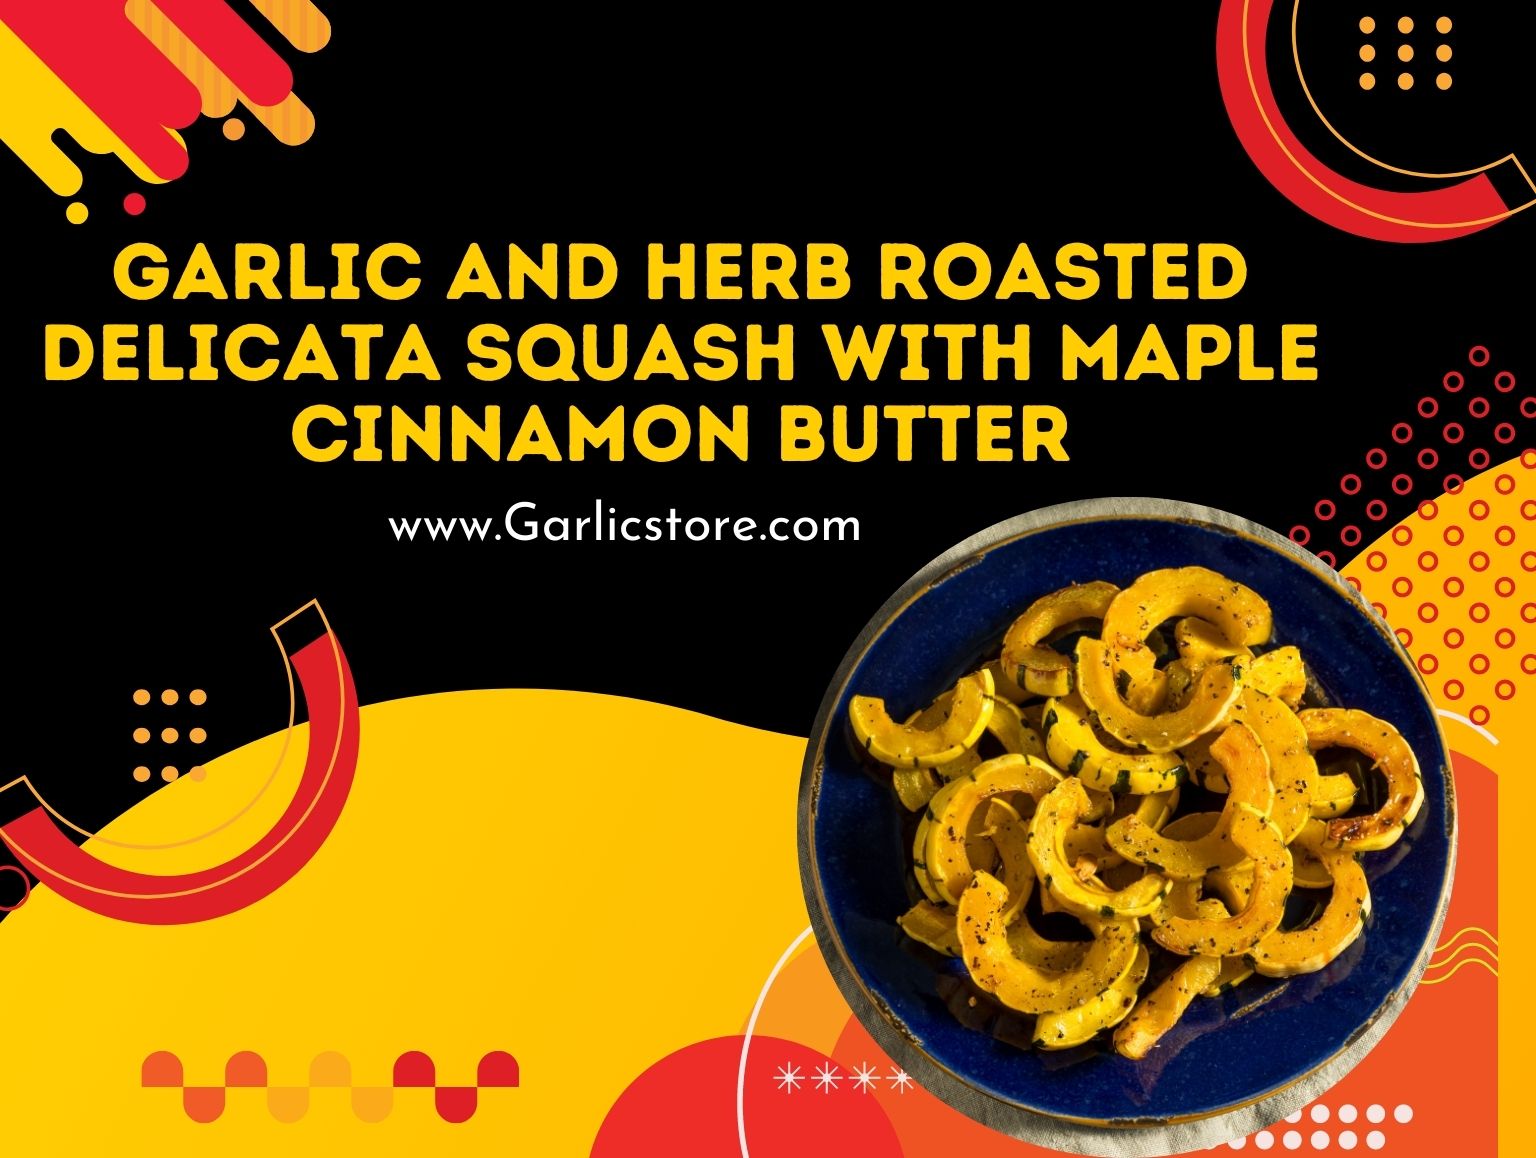 Garlic and Herb Roasted Delicata Squash with Maple Cinnamon Butter